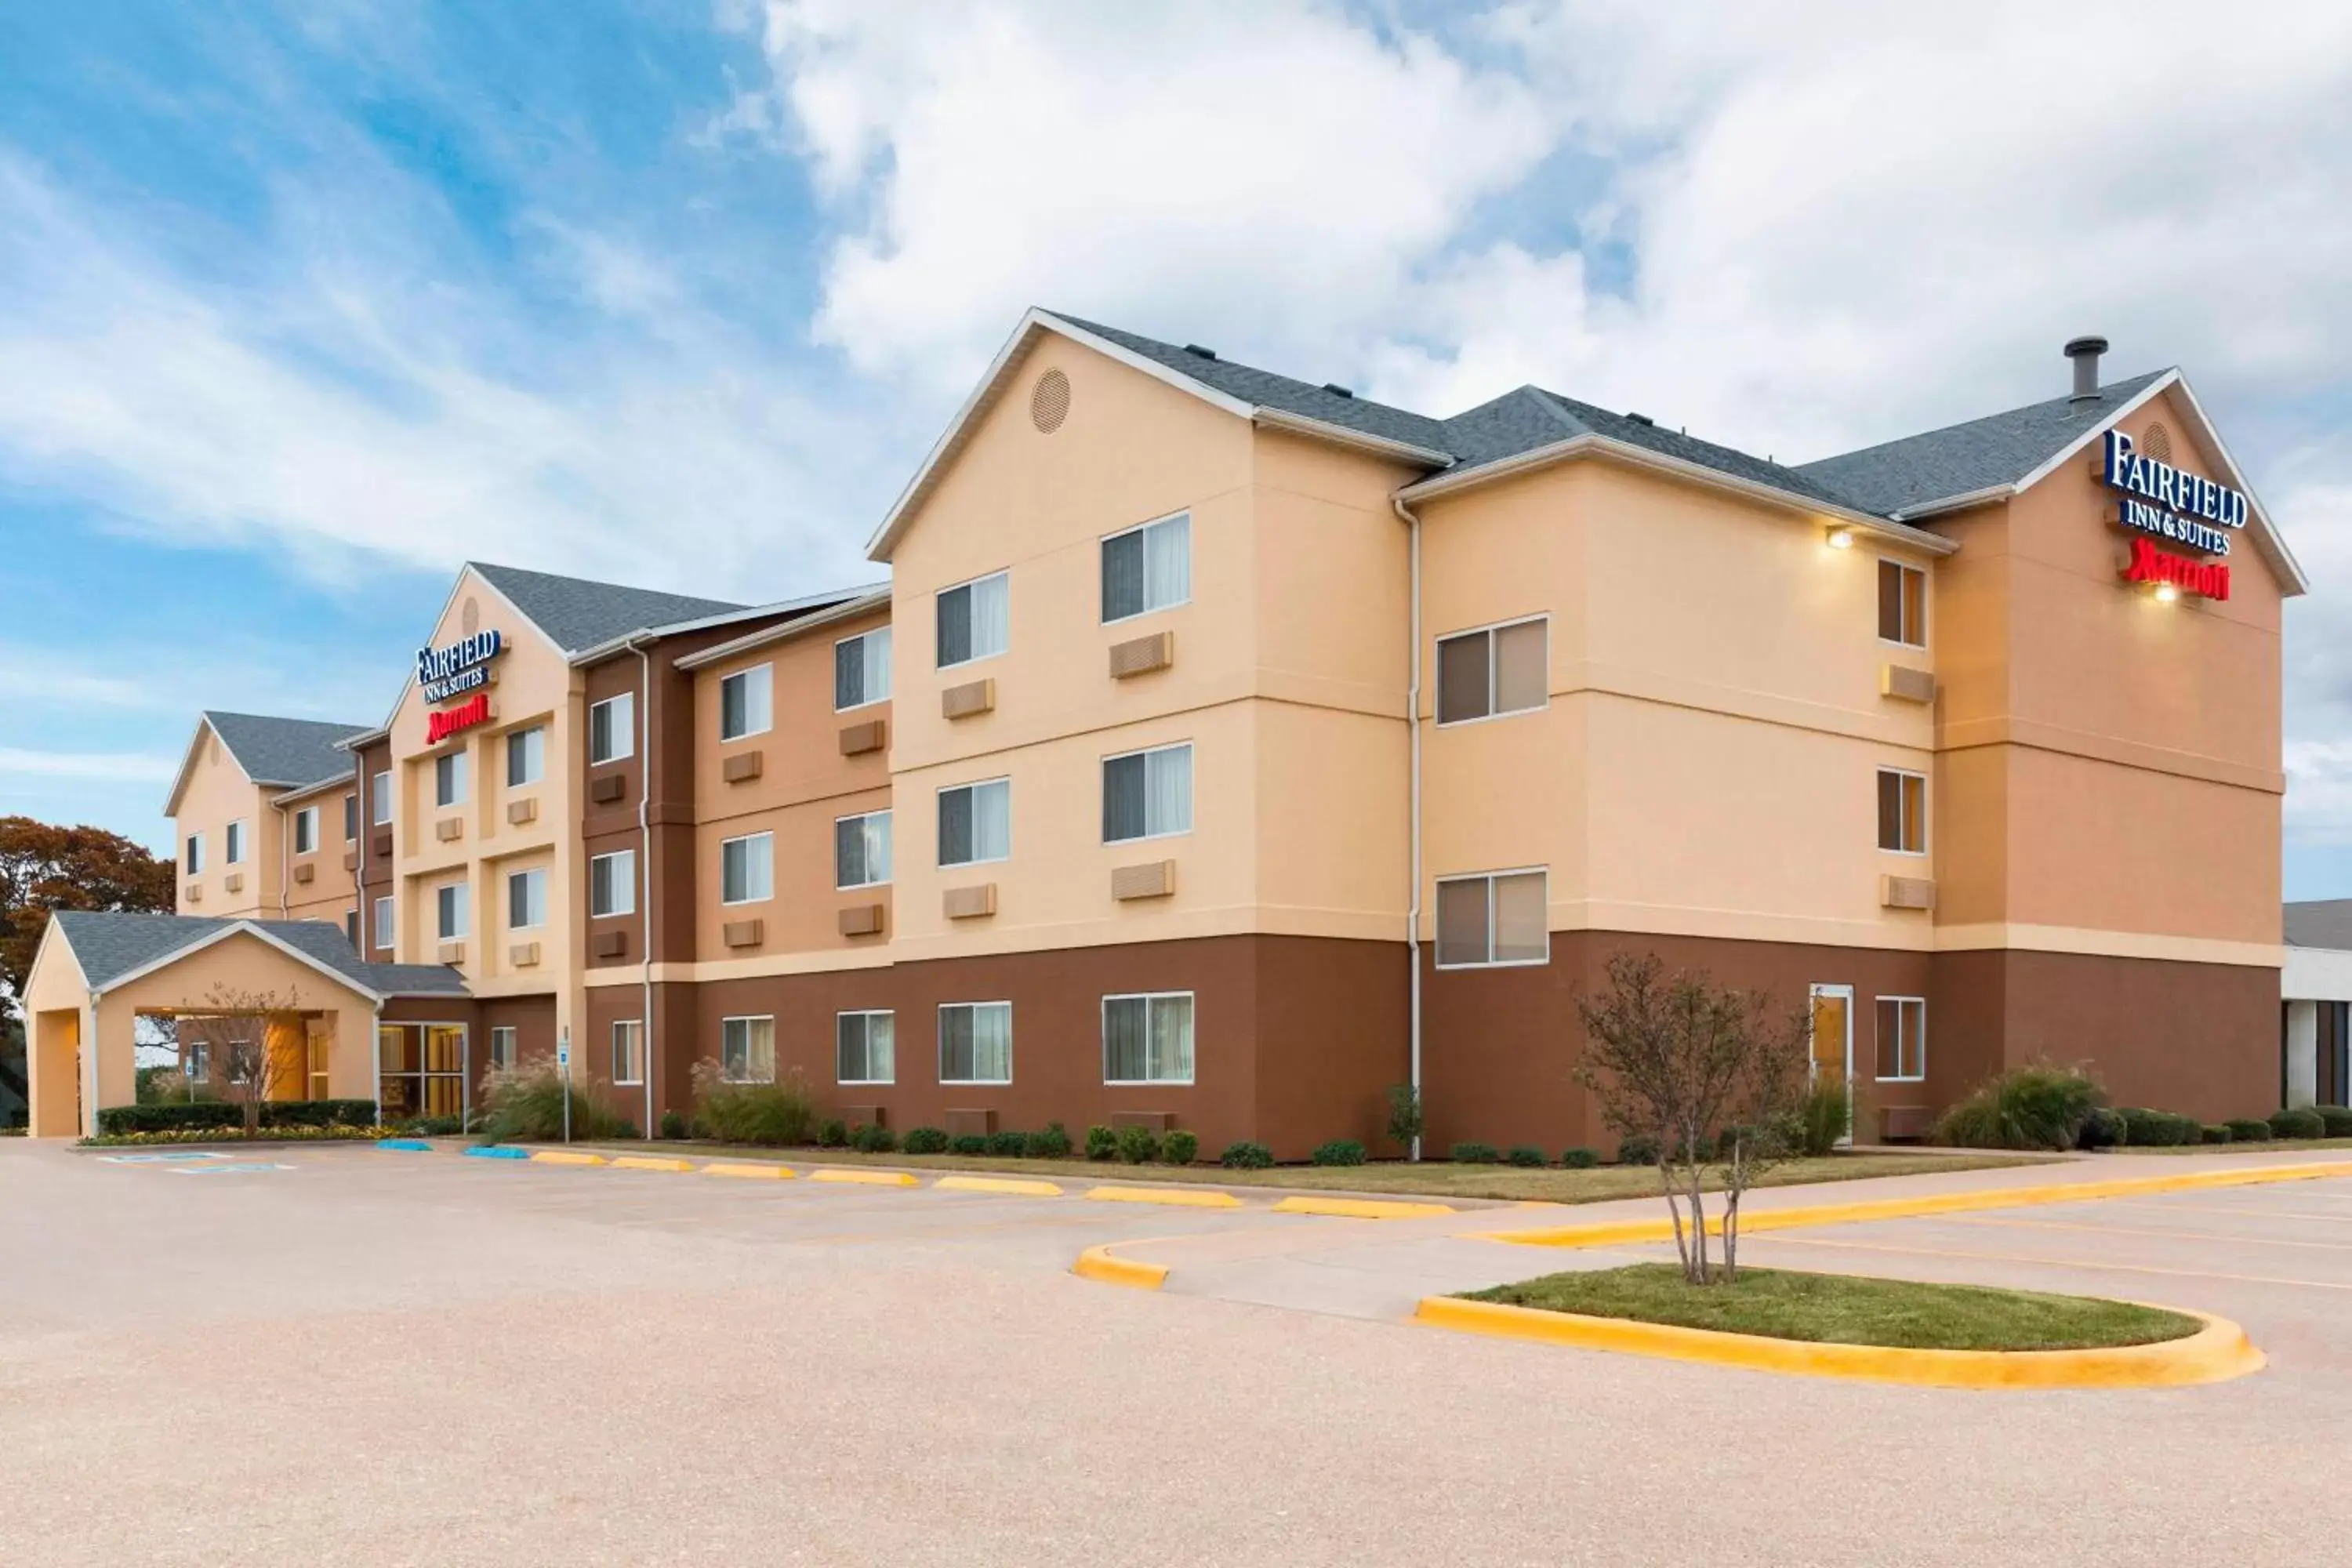 Property Building in Fairfield Inn & Suites Waco South